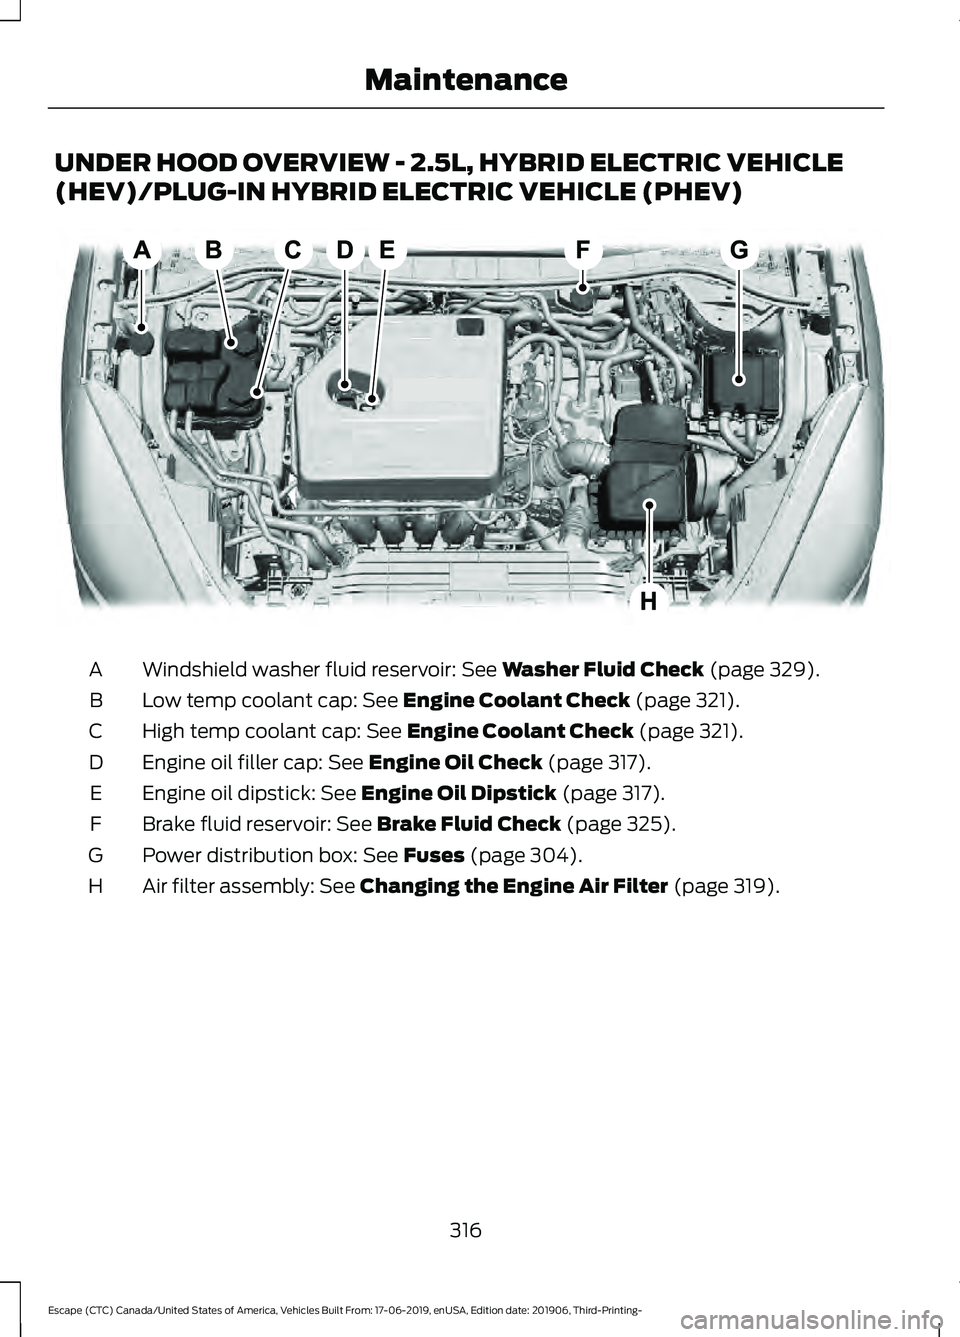 FORD ESCAPE 2020  Owners Manual UNDER HOOD OVERVIEW - 2.5L, HYBRID ELECTRIC VEHICLE
(HEV)/PLUG-IN HYBRID ELECTRIC VEHICLE (PHEV)
Windshield washer fluid reservoir: See Washer Fluid Check (page 329).
A
Low temp coolant cap:
 See Engi